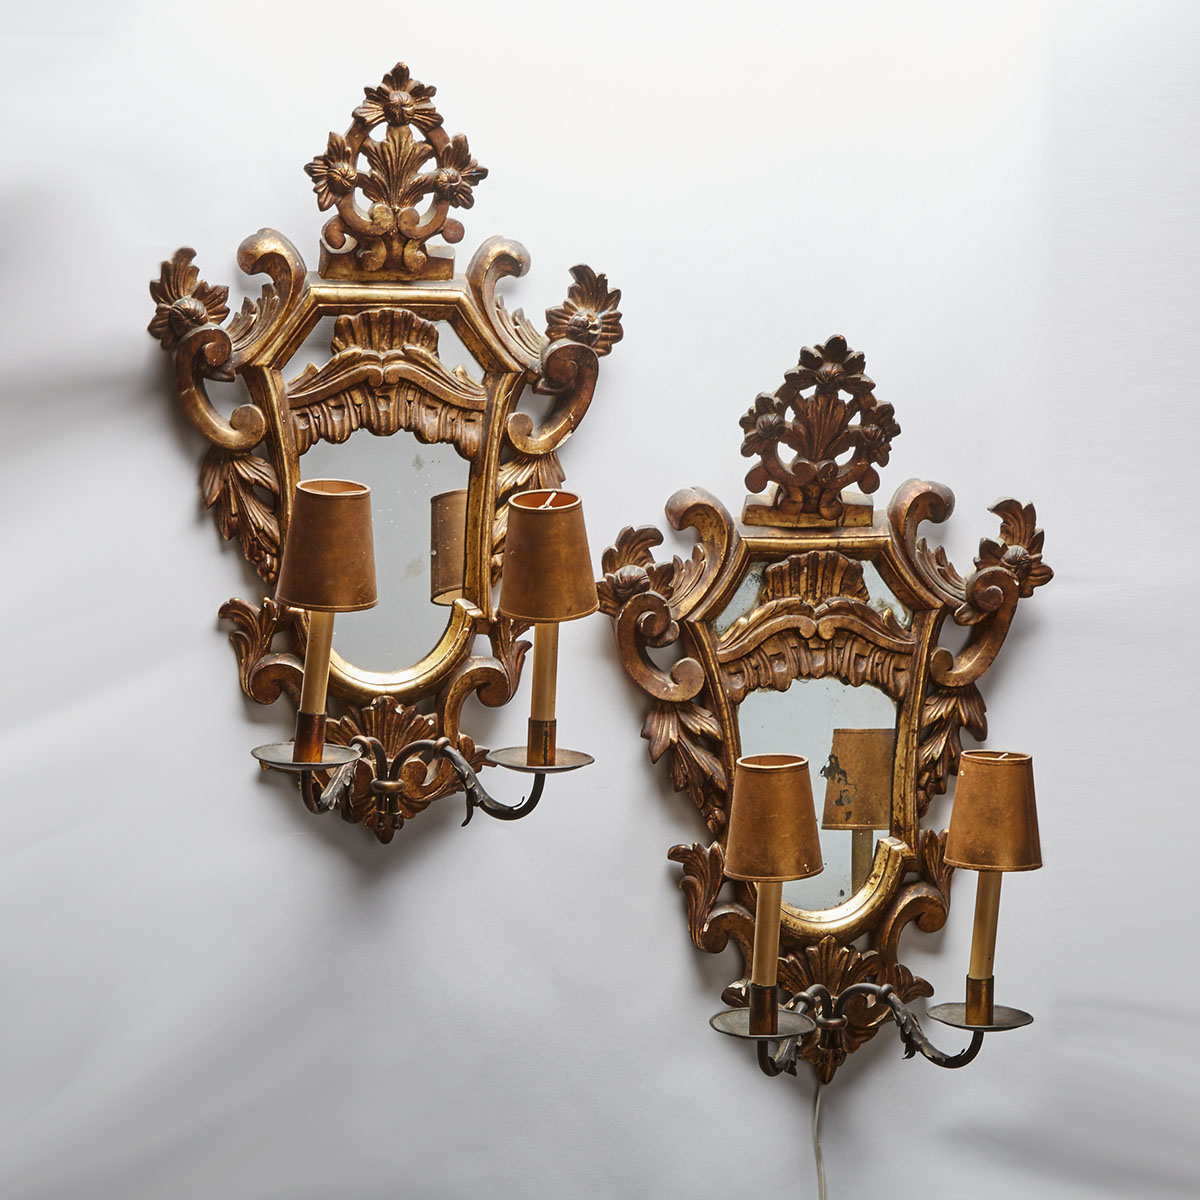 Pair of Florentine Gilt Wood Mirror Back Wall Sconces, early 20th century